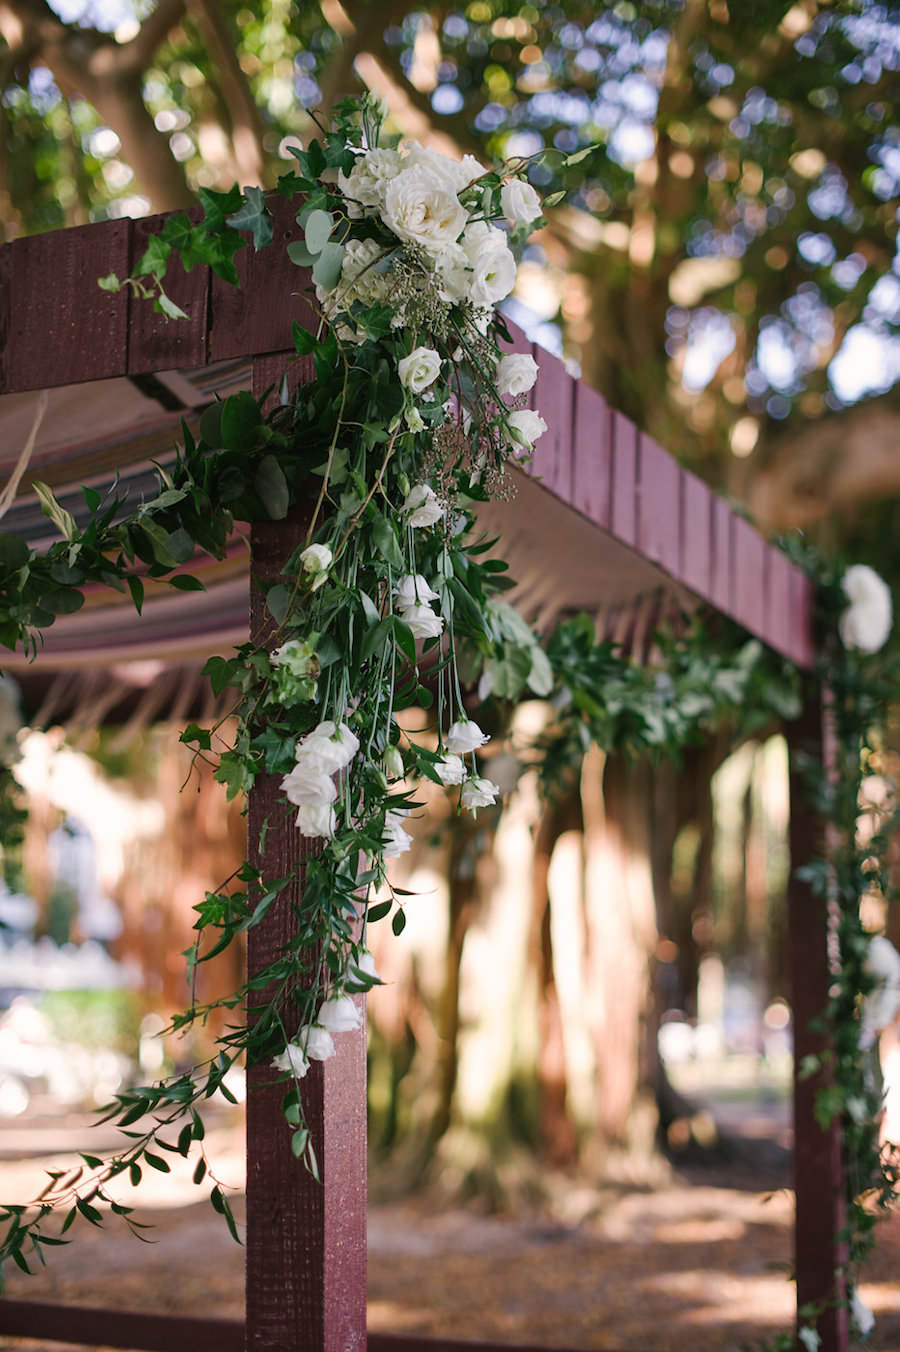 Outdoor Florida Jewish Wedding Ceremony Inspiration | Chuppah with Greenery and White Rose Floral Decor and Canopy